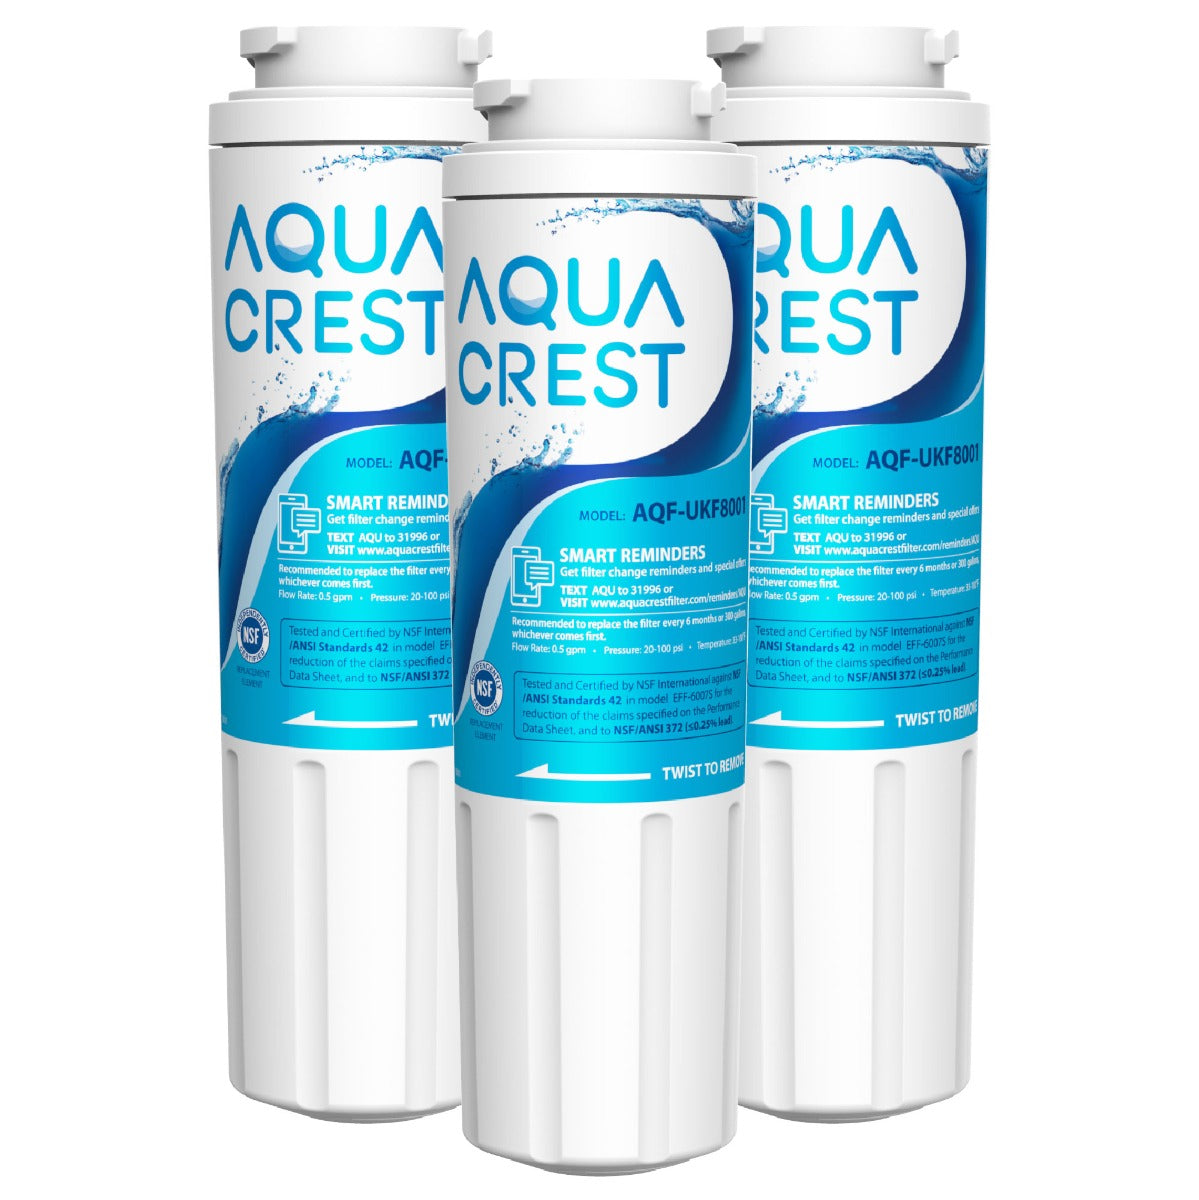 AQUA CREST UKF8001 Refrigerator Water Filter, Compatible with Maytag  UKF8001P, Whirlpool UKF8001AXX-750, UKF8001AXX, EDR4RXD1, 4396395,  EveryDrop Filter 4, Msd2651heb (Pack of 3) - Yahoo Shopping